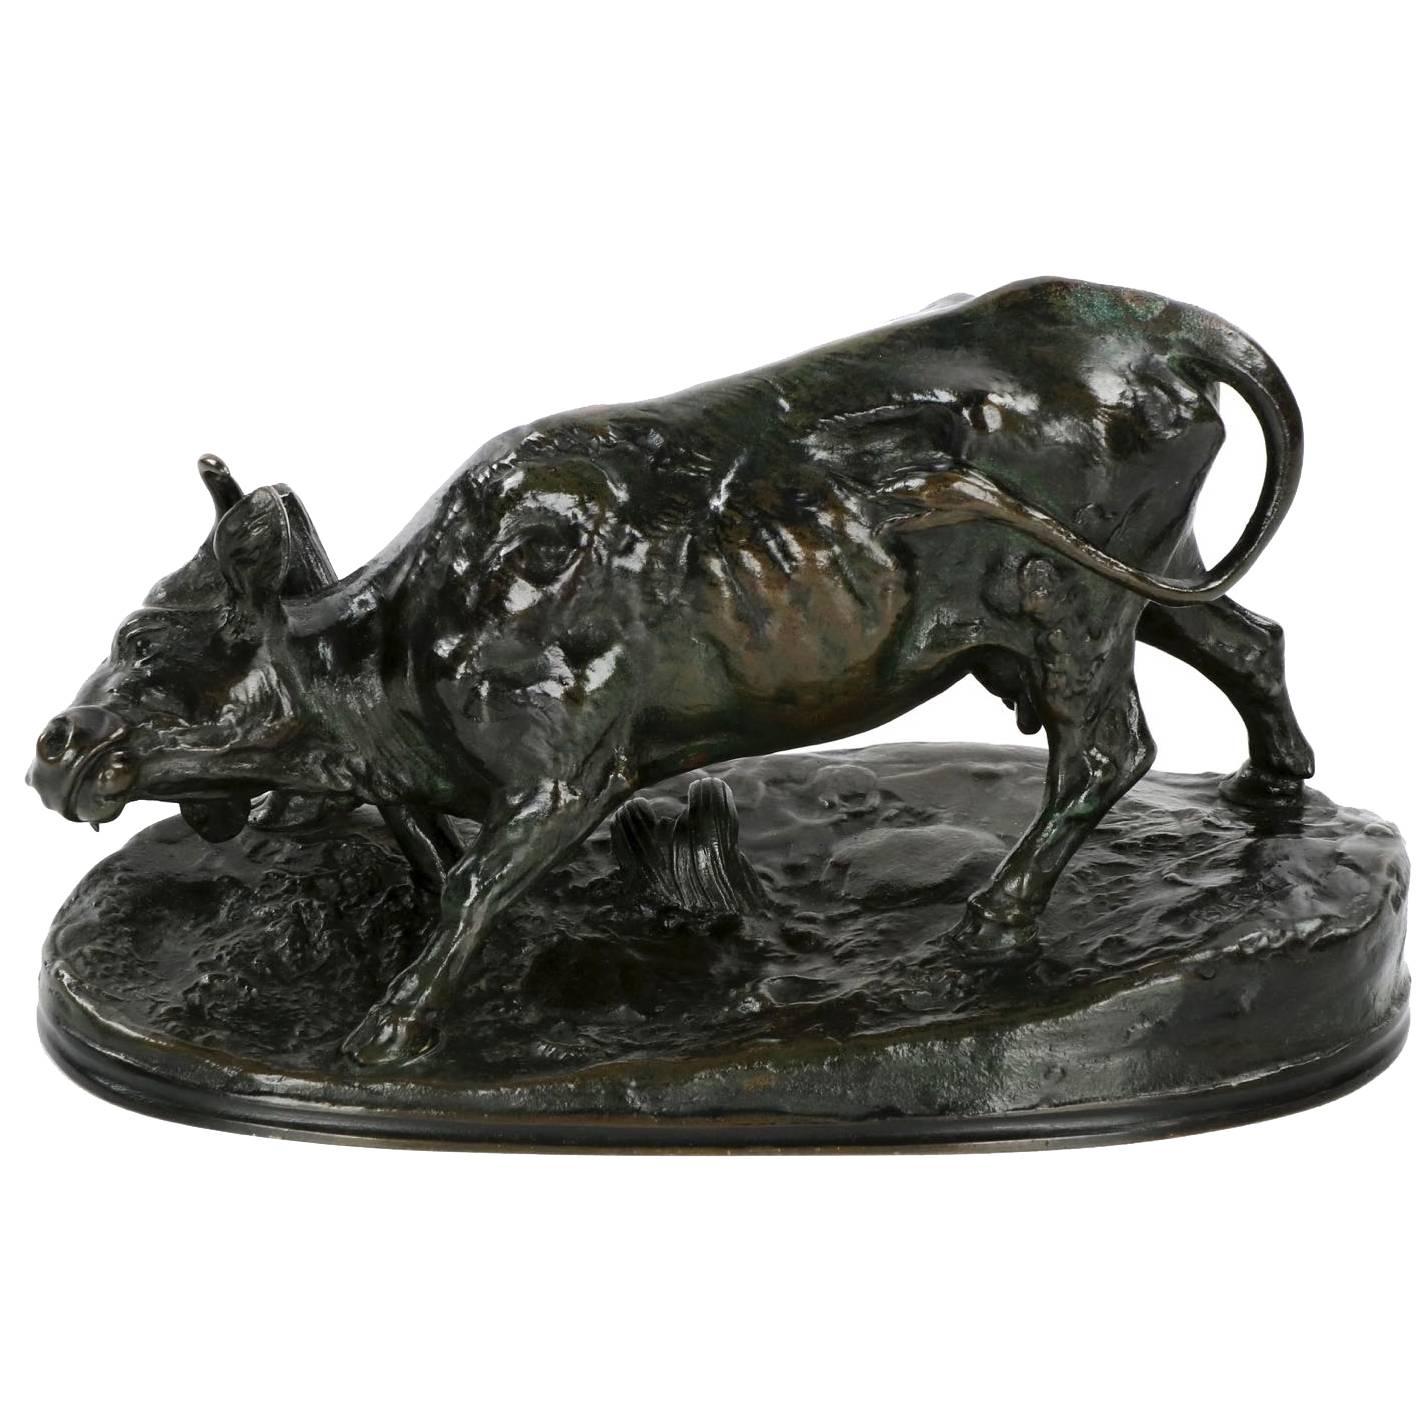 French Antique Bronze Sculpture of Cow by Barye & F. Barbedienne, circa 1900